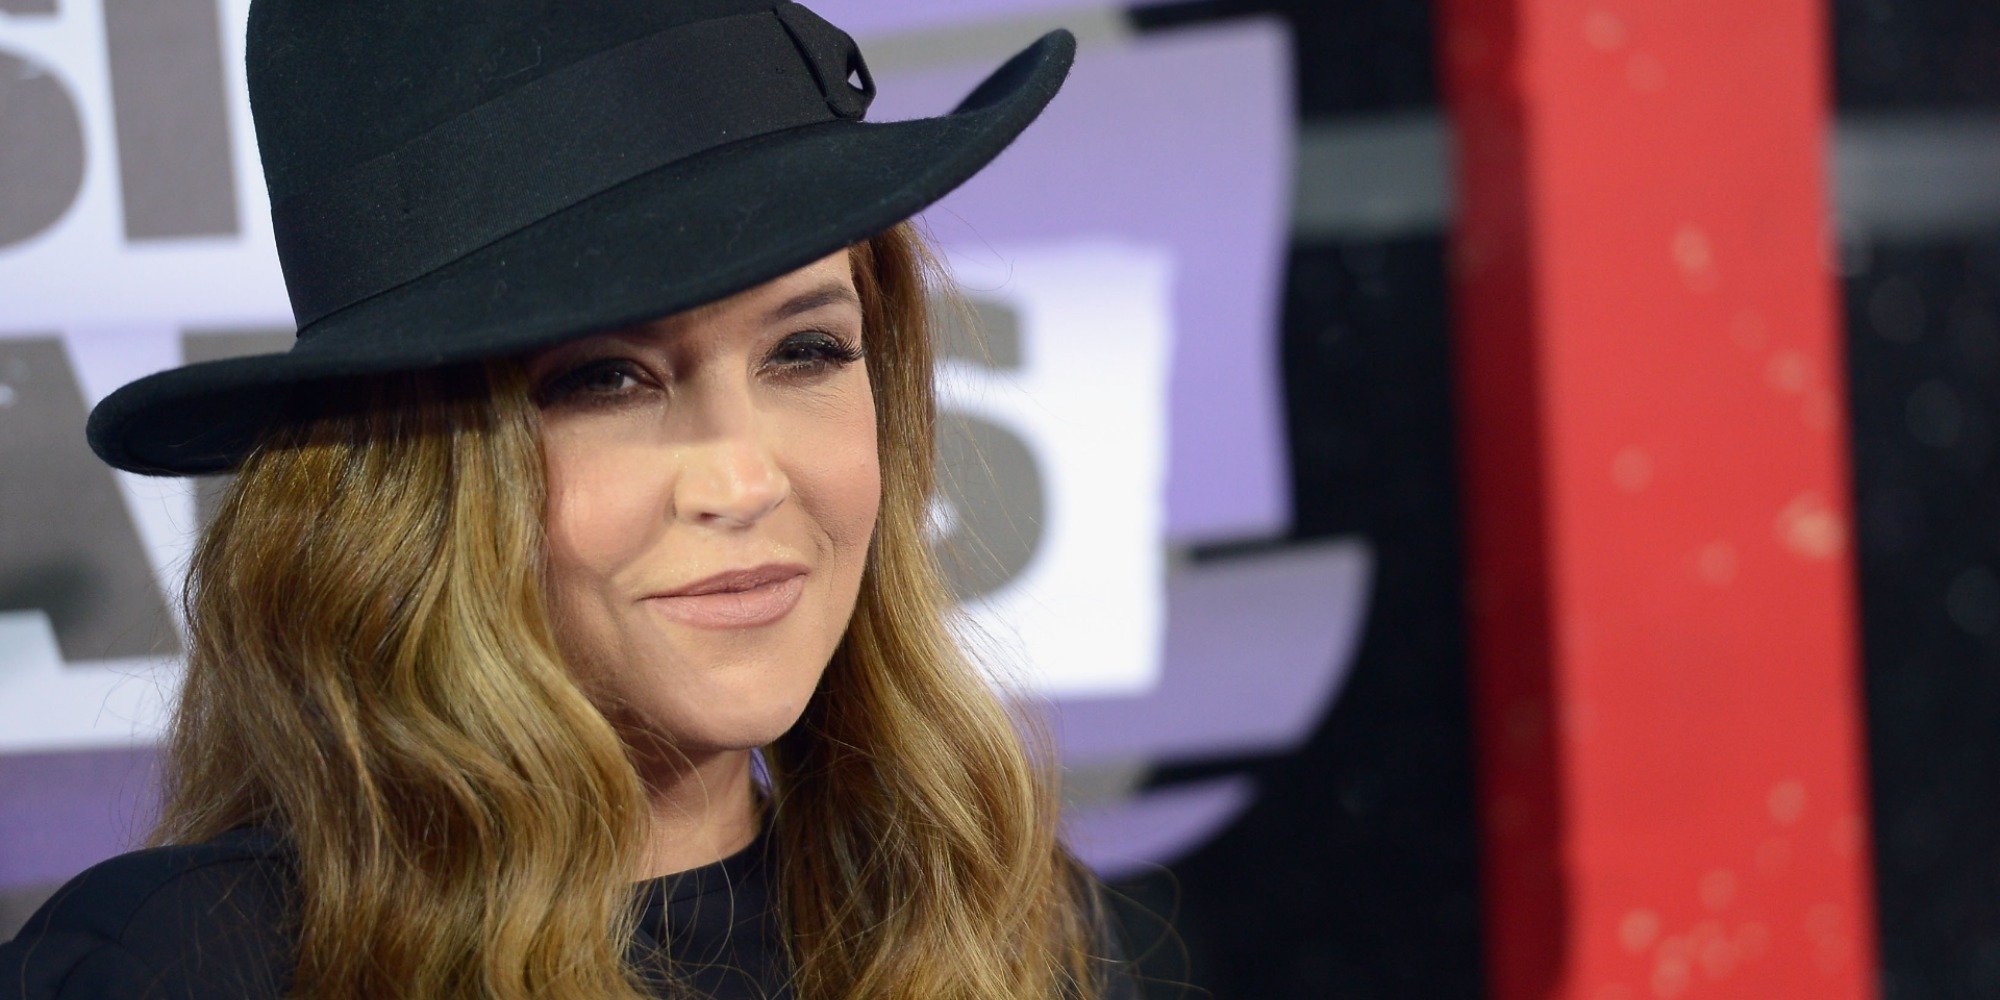 Lisa Marie Presley attends the 2013 CMT Music awards at the Bridgestone Arena on June 5, 2013 in Nashville, Tennessee.